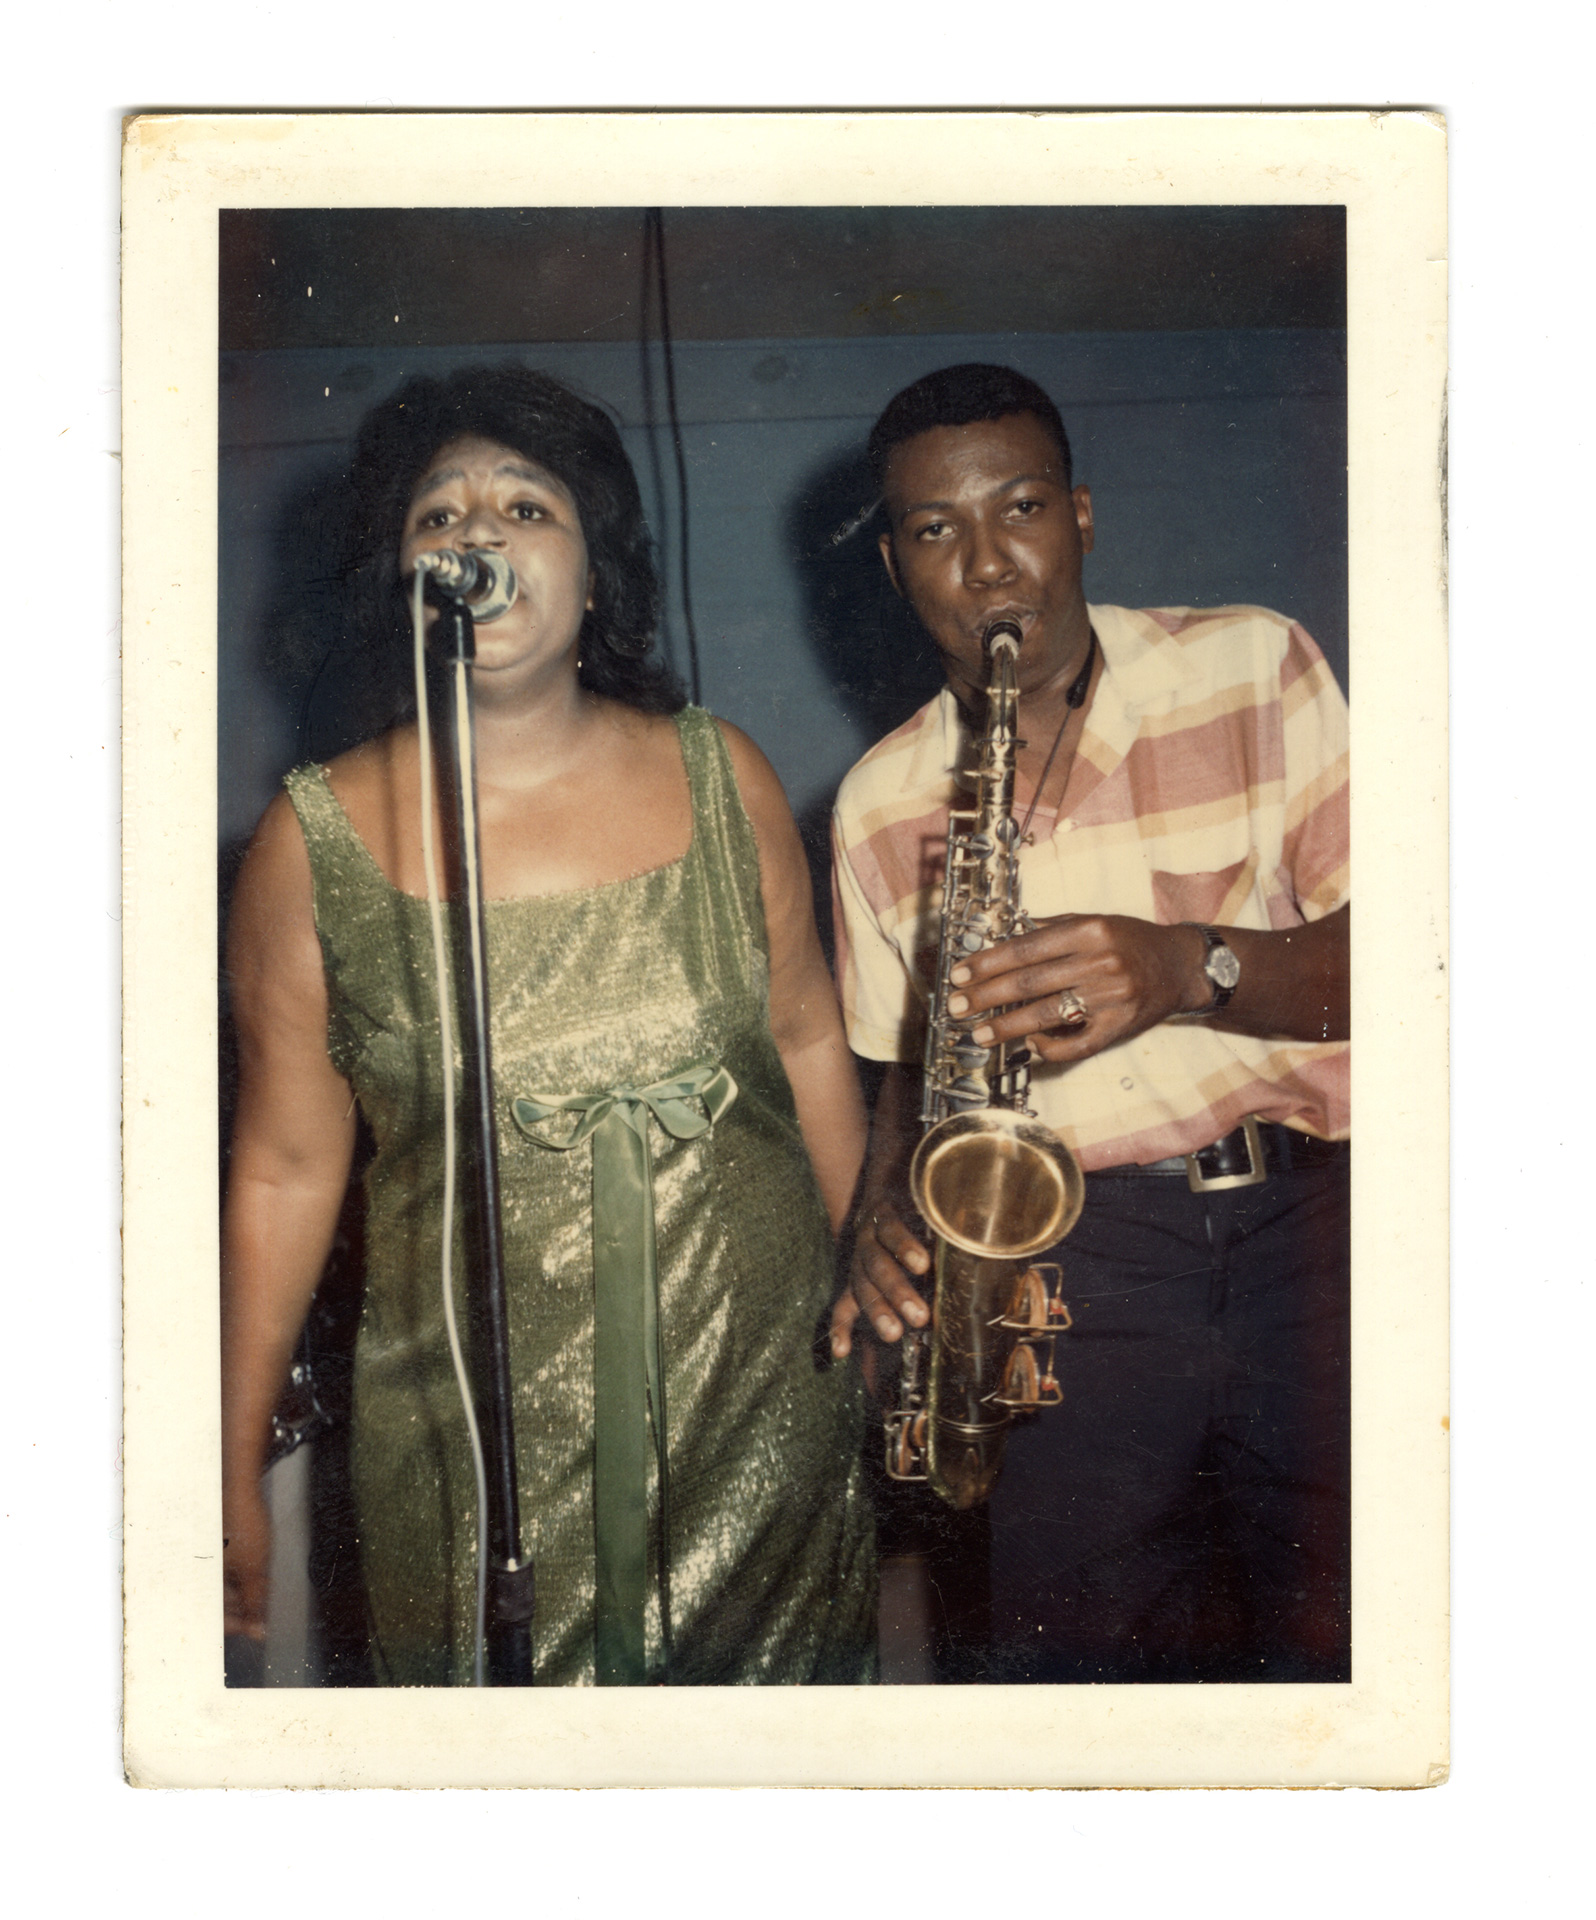 Gloria Walker and Lonnie West in 1968 (photograph courtesy of Georgia College Special Collections)